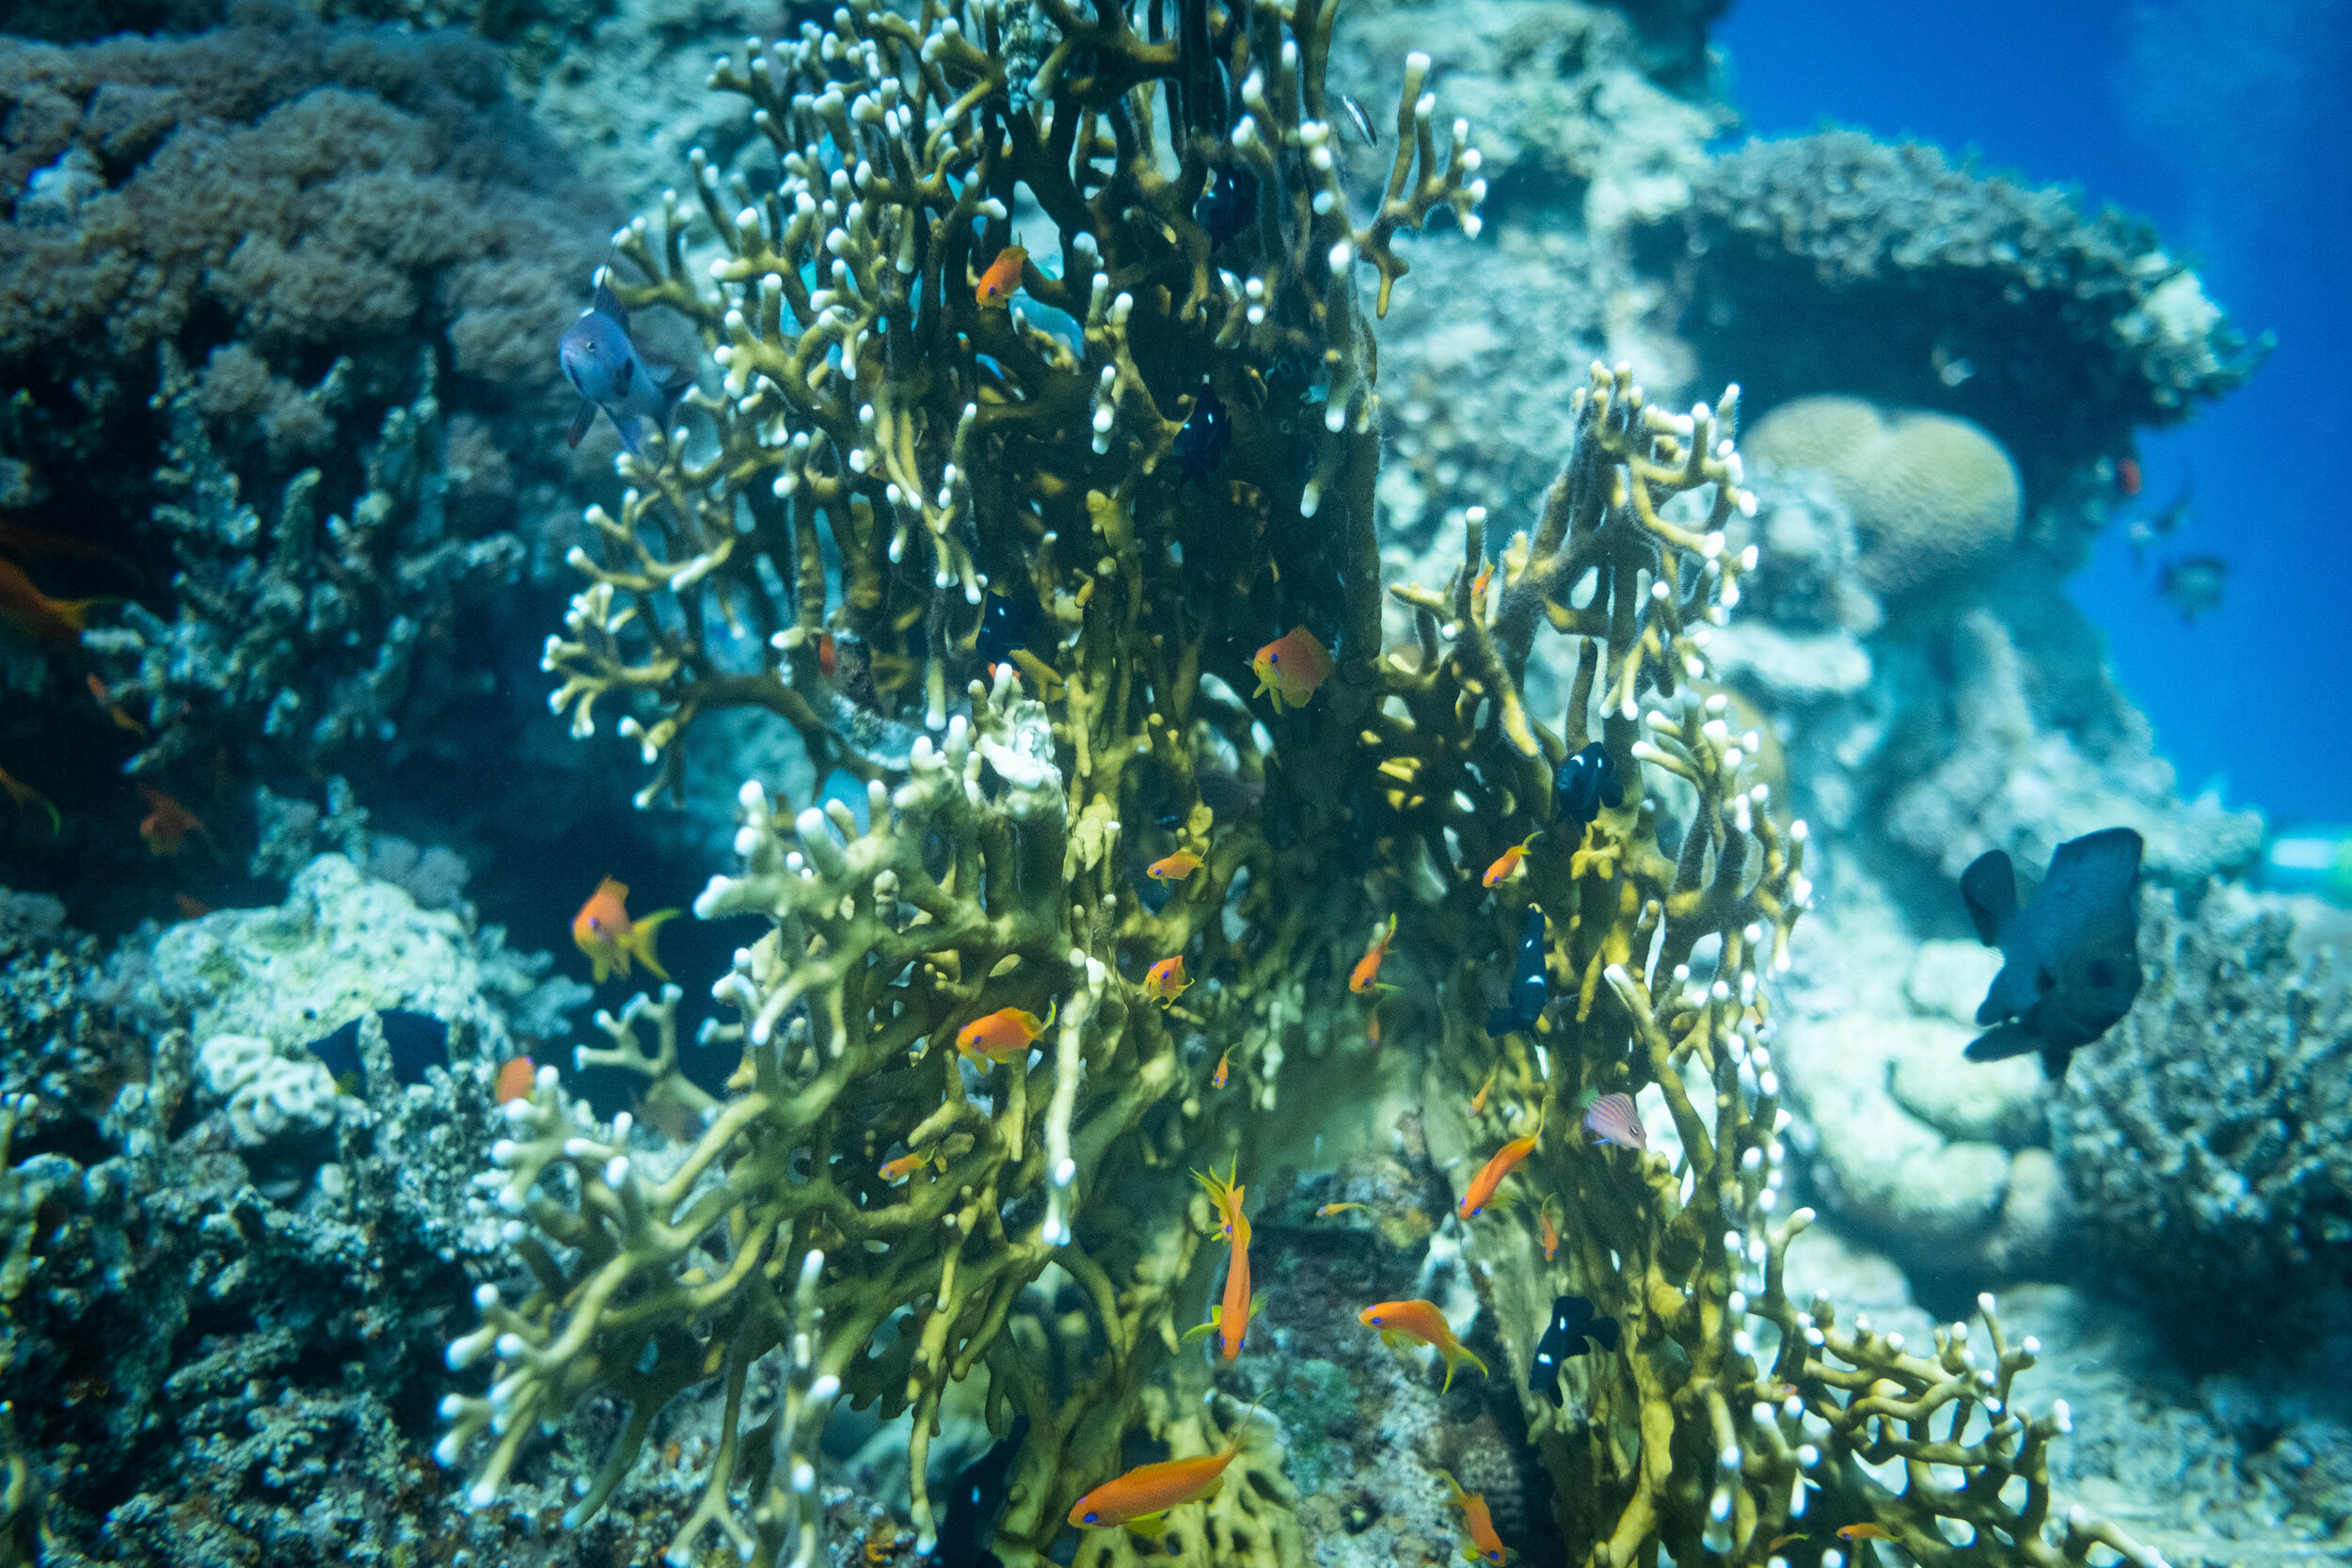  View of Coral Reef in the Red Sea in Eilat. Photo by Noam Revkin Fenton/Flash90. 